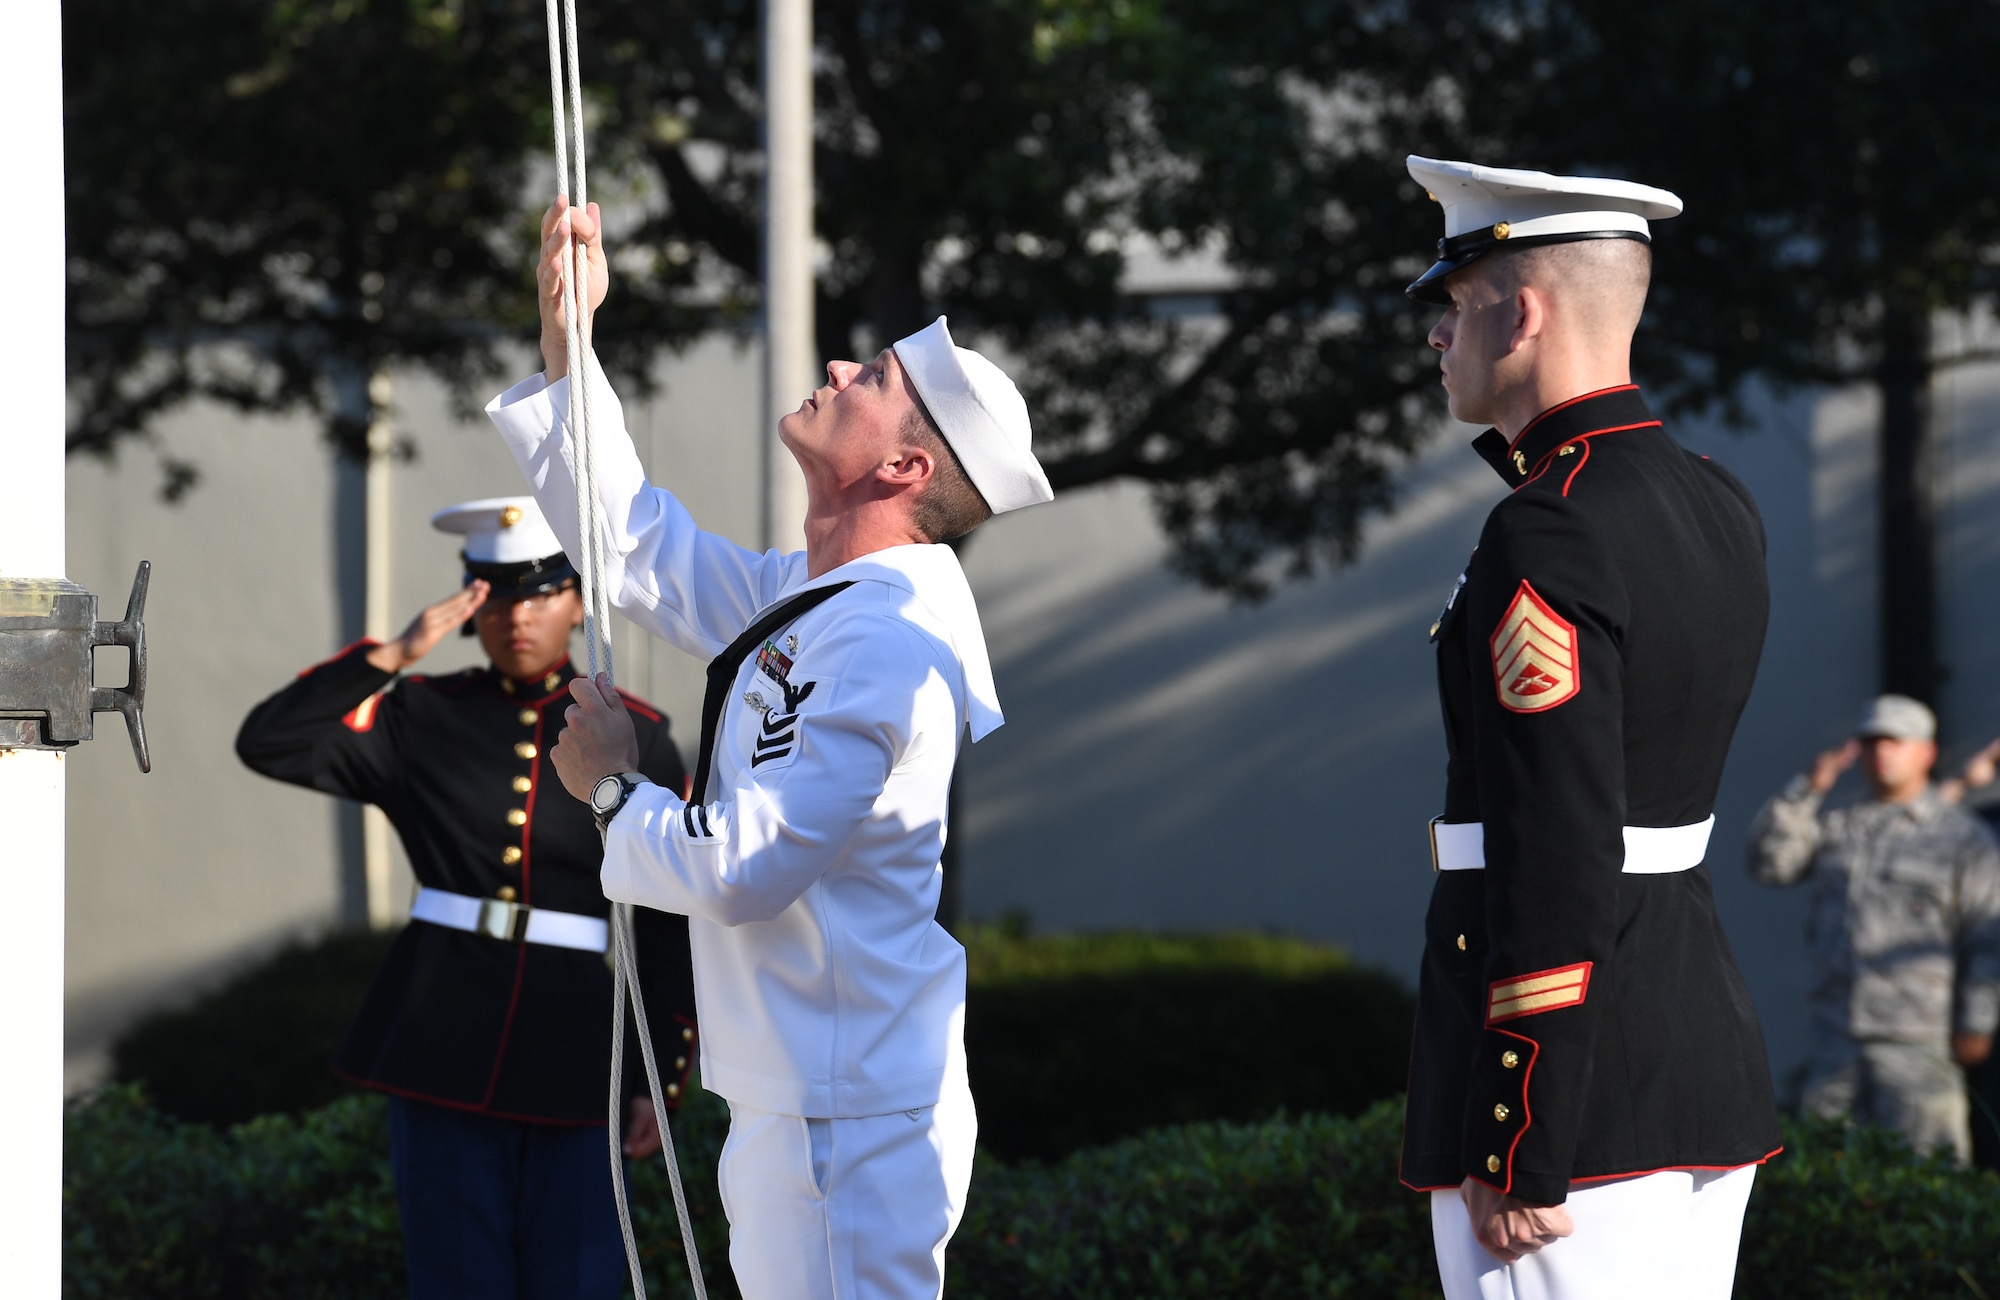 U.S. Navy Aerographers Mate 1st Class Daniel Ealy, Center for Naval Aviation Technical Training Unit Keesler instructor, raises the U.S. flag as U.S. Marine Staff Sgt. Jacob Nixon, Keesler Marine Detachment curriculum manager, renders a salute during a 9/11 memorial ceremony hosted by CNATTU Keesler in front of the 81st Training Wing headquarters building on Keesler Air Force Base, Mississippi, Sept. 11, 2019. The event honored those who lost their lives during the 9/11 attacks. (U.S. Air Force photo by Kemberly Groue)